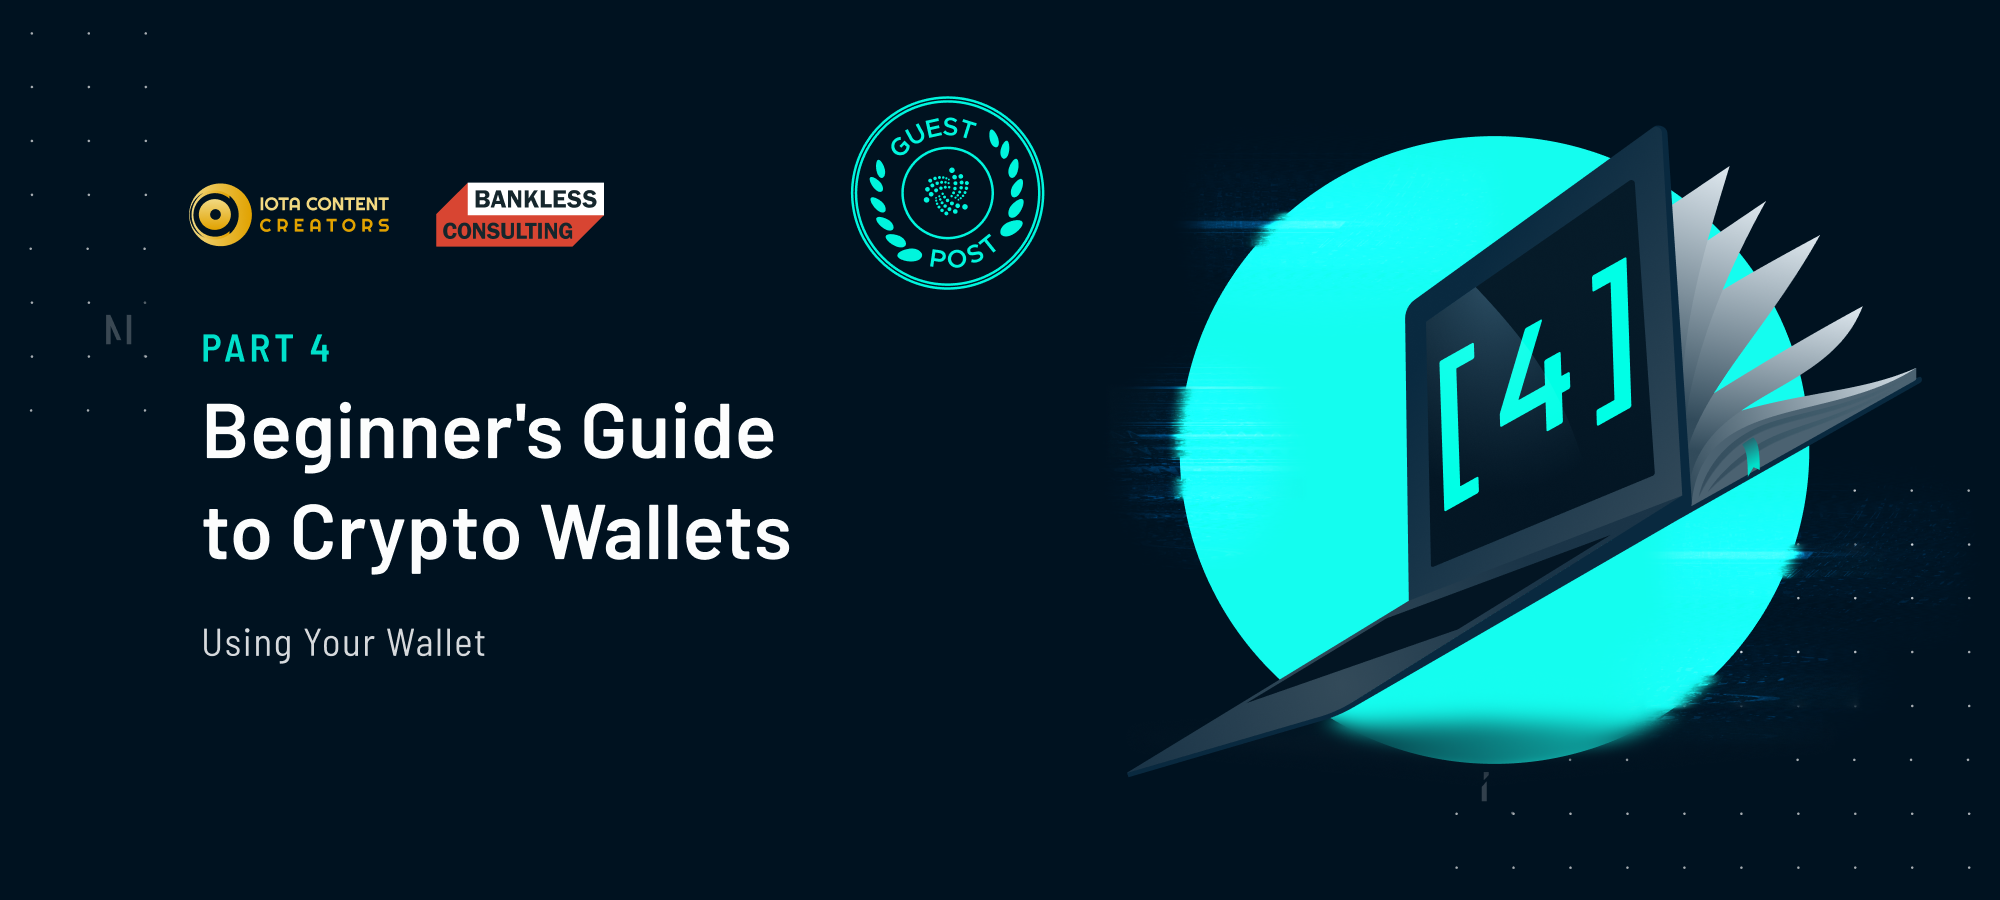 Beginner&apos;s Guide to Crypto Wallets: Part 4